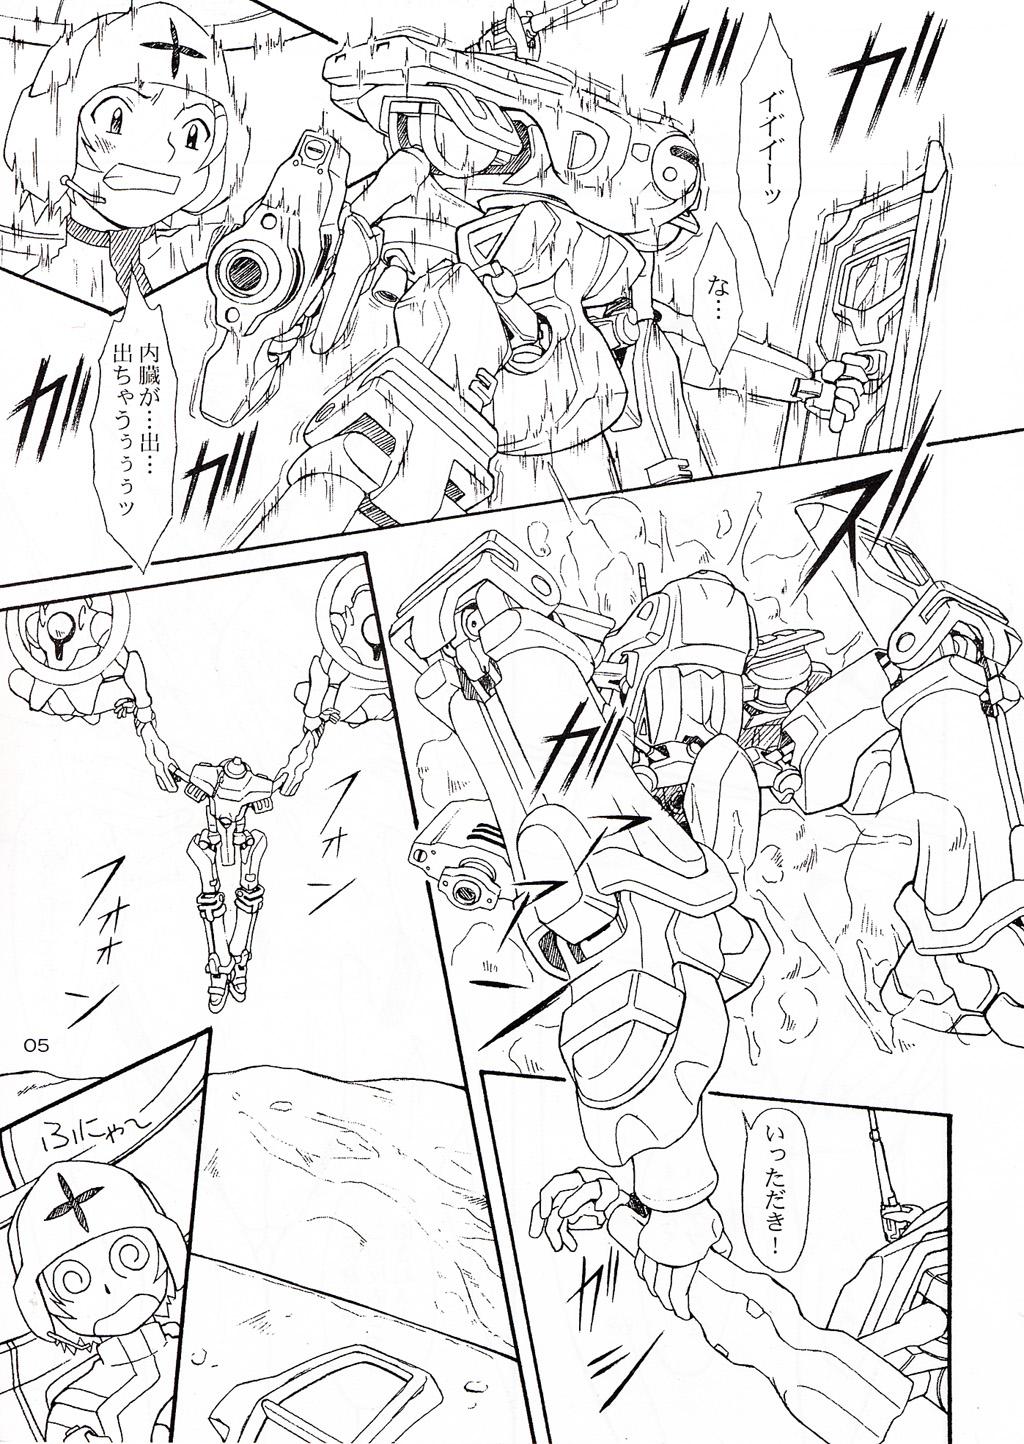 Hidden Camera Over Echo - Turn a gundam Overman king gainer Amature Sex - Page 4